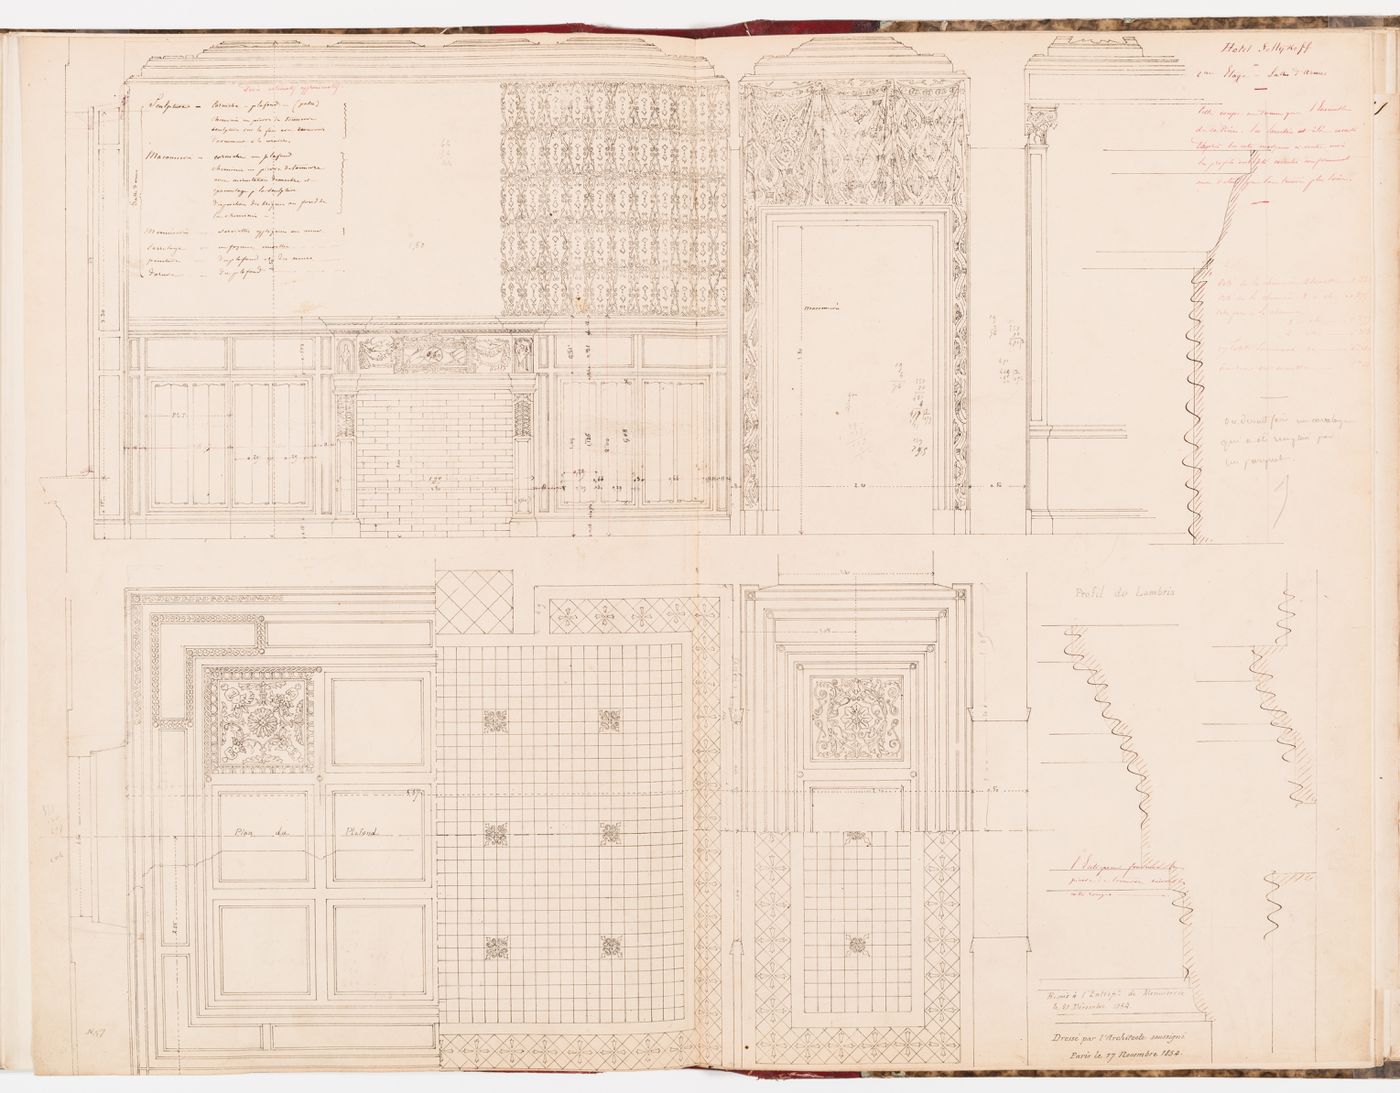 Interior elevation, reflected ceiling plan, plan for the floor tile pattern, and moulding profiles for the "salle sur la cour" or the "salle d'armes" on the second floor, Hôtel Soltykoff